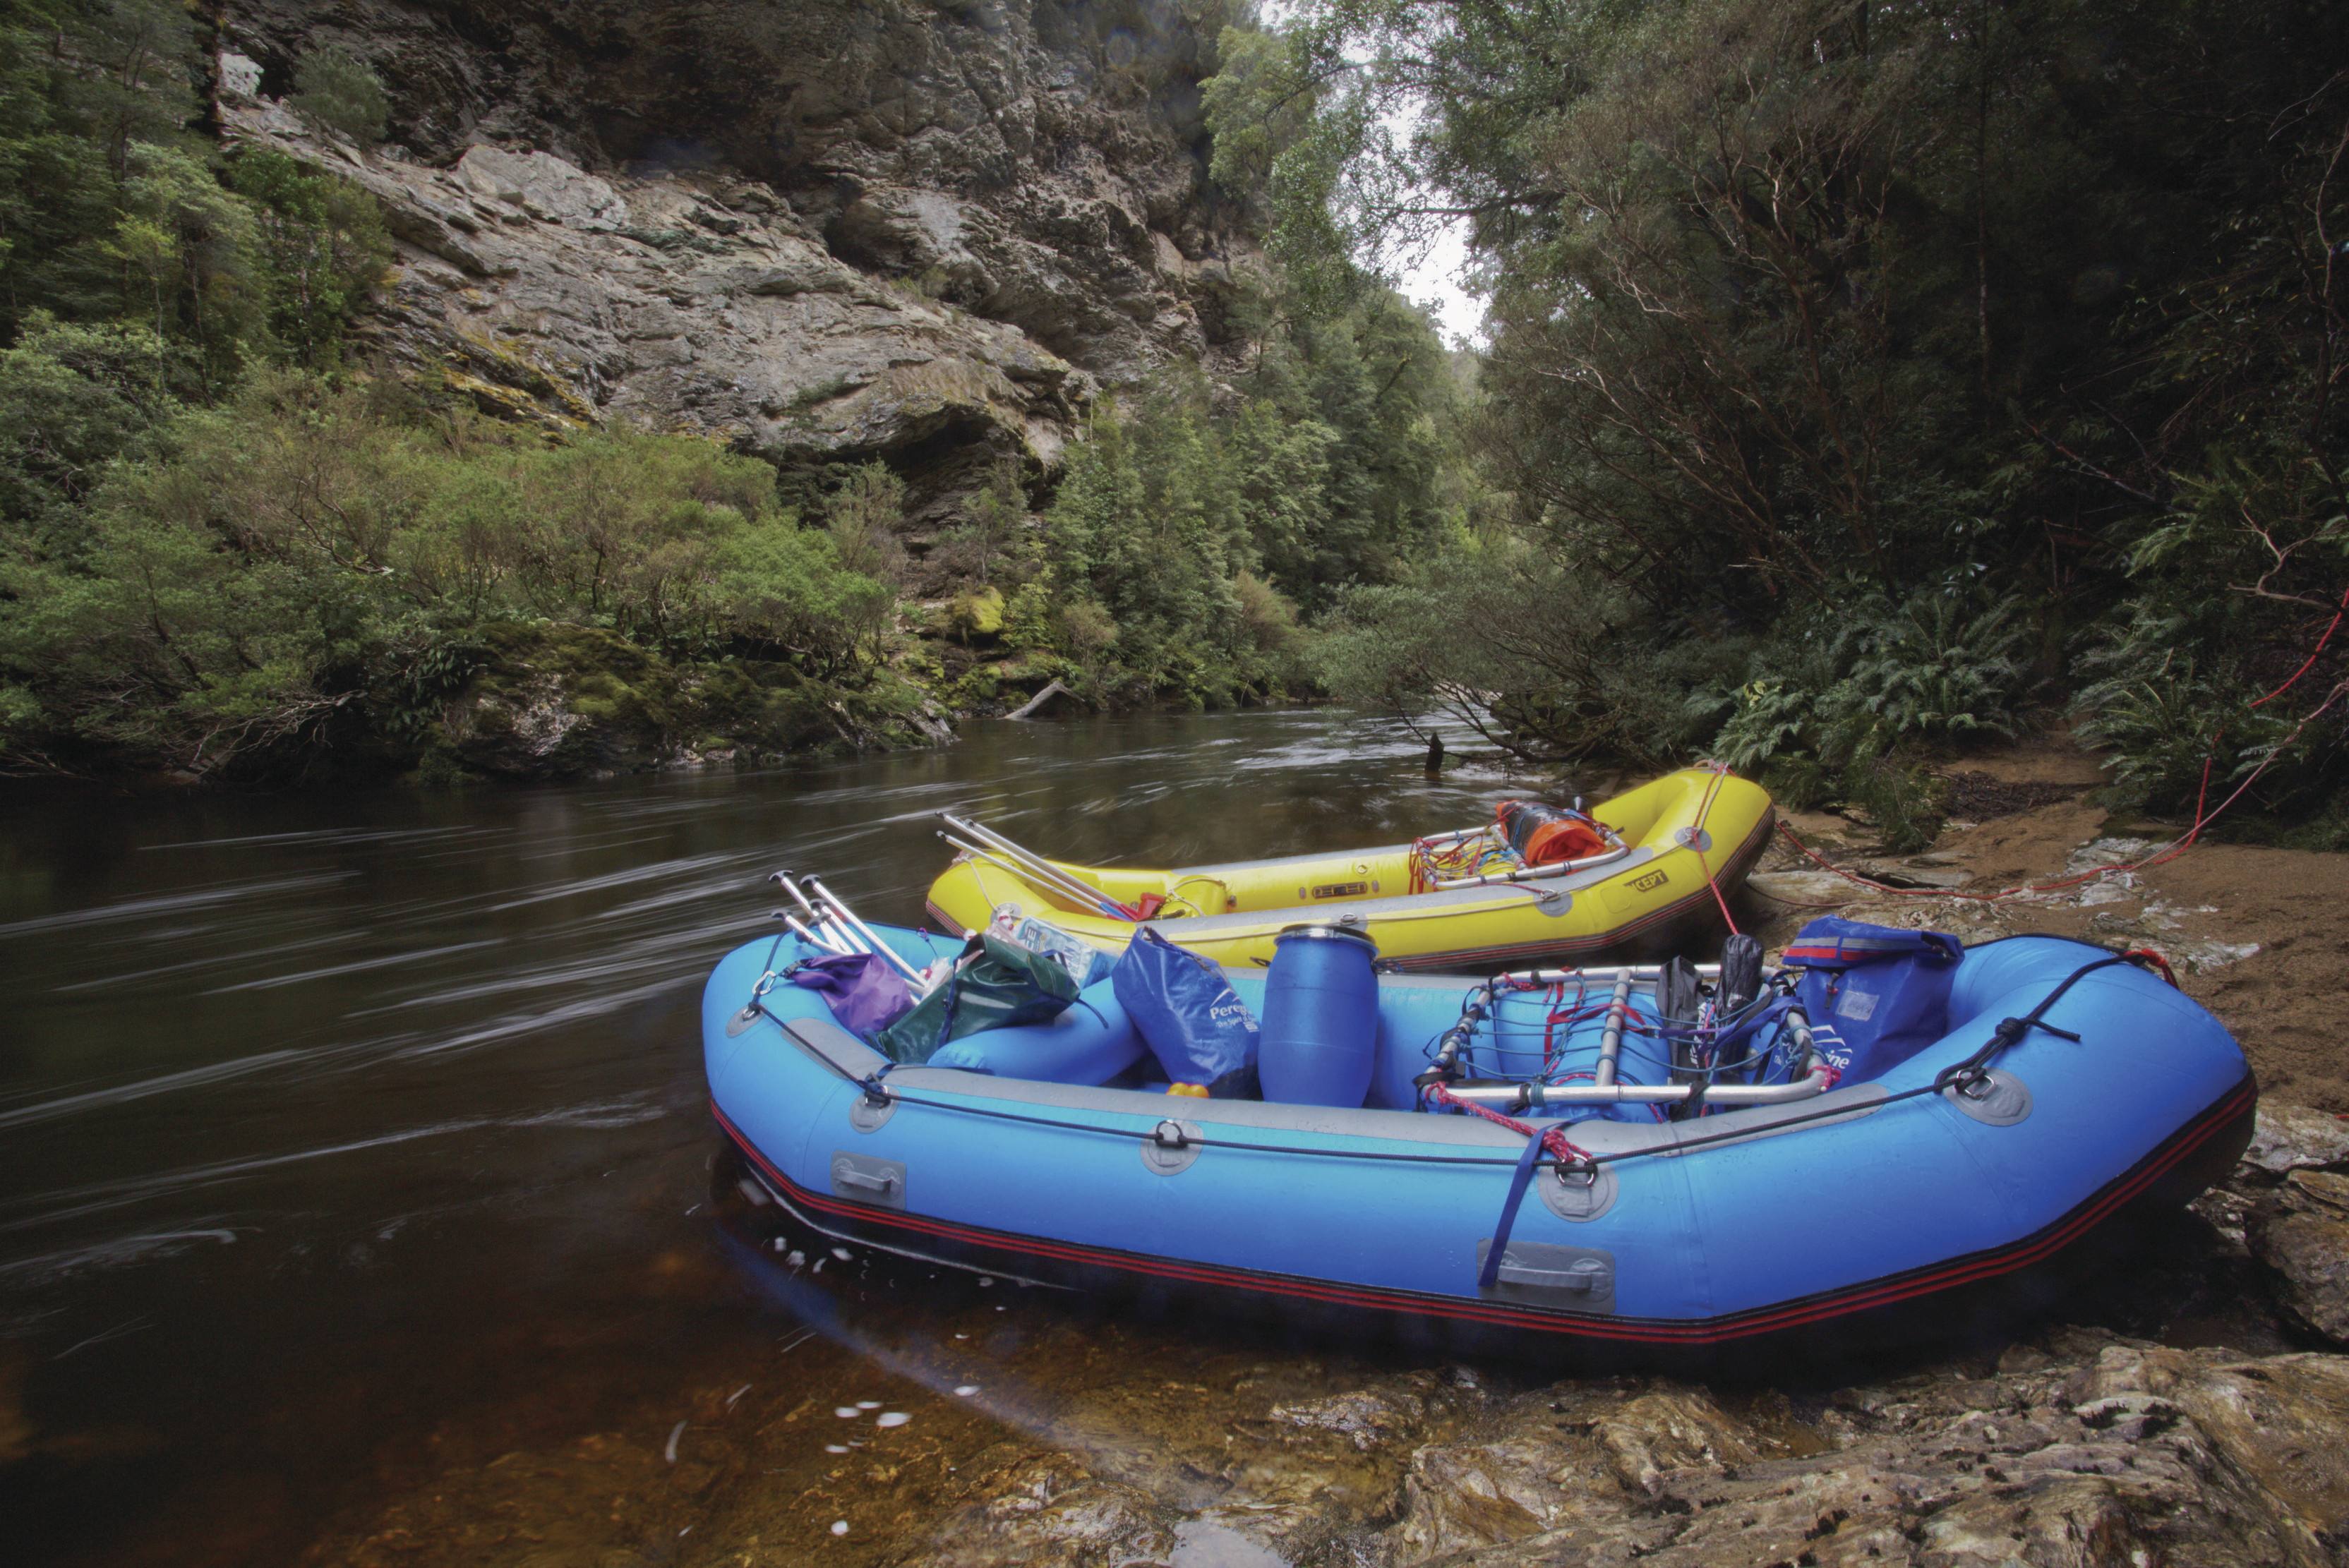 A blue and yellow raft docked in an area of the Franklin River, hosted by Water By Nature Tasmania.